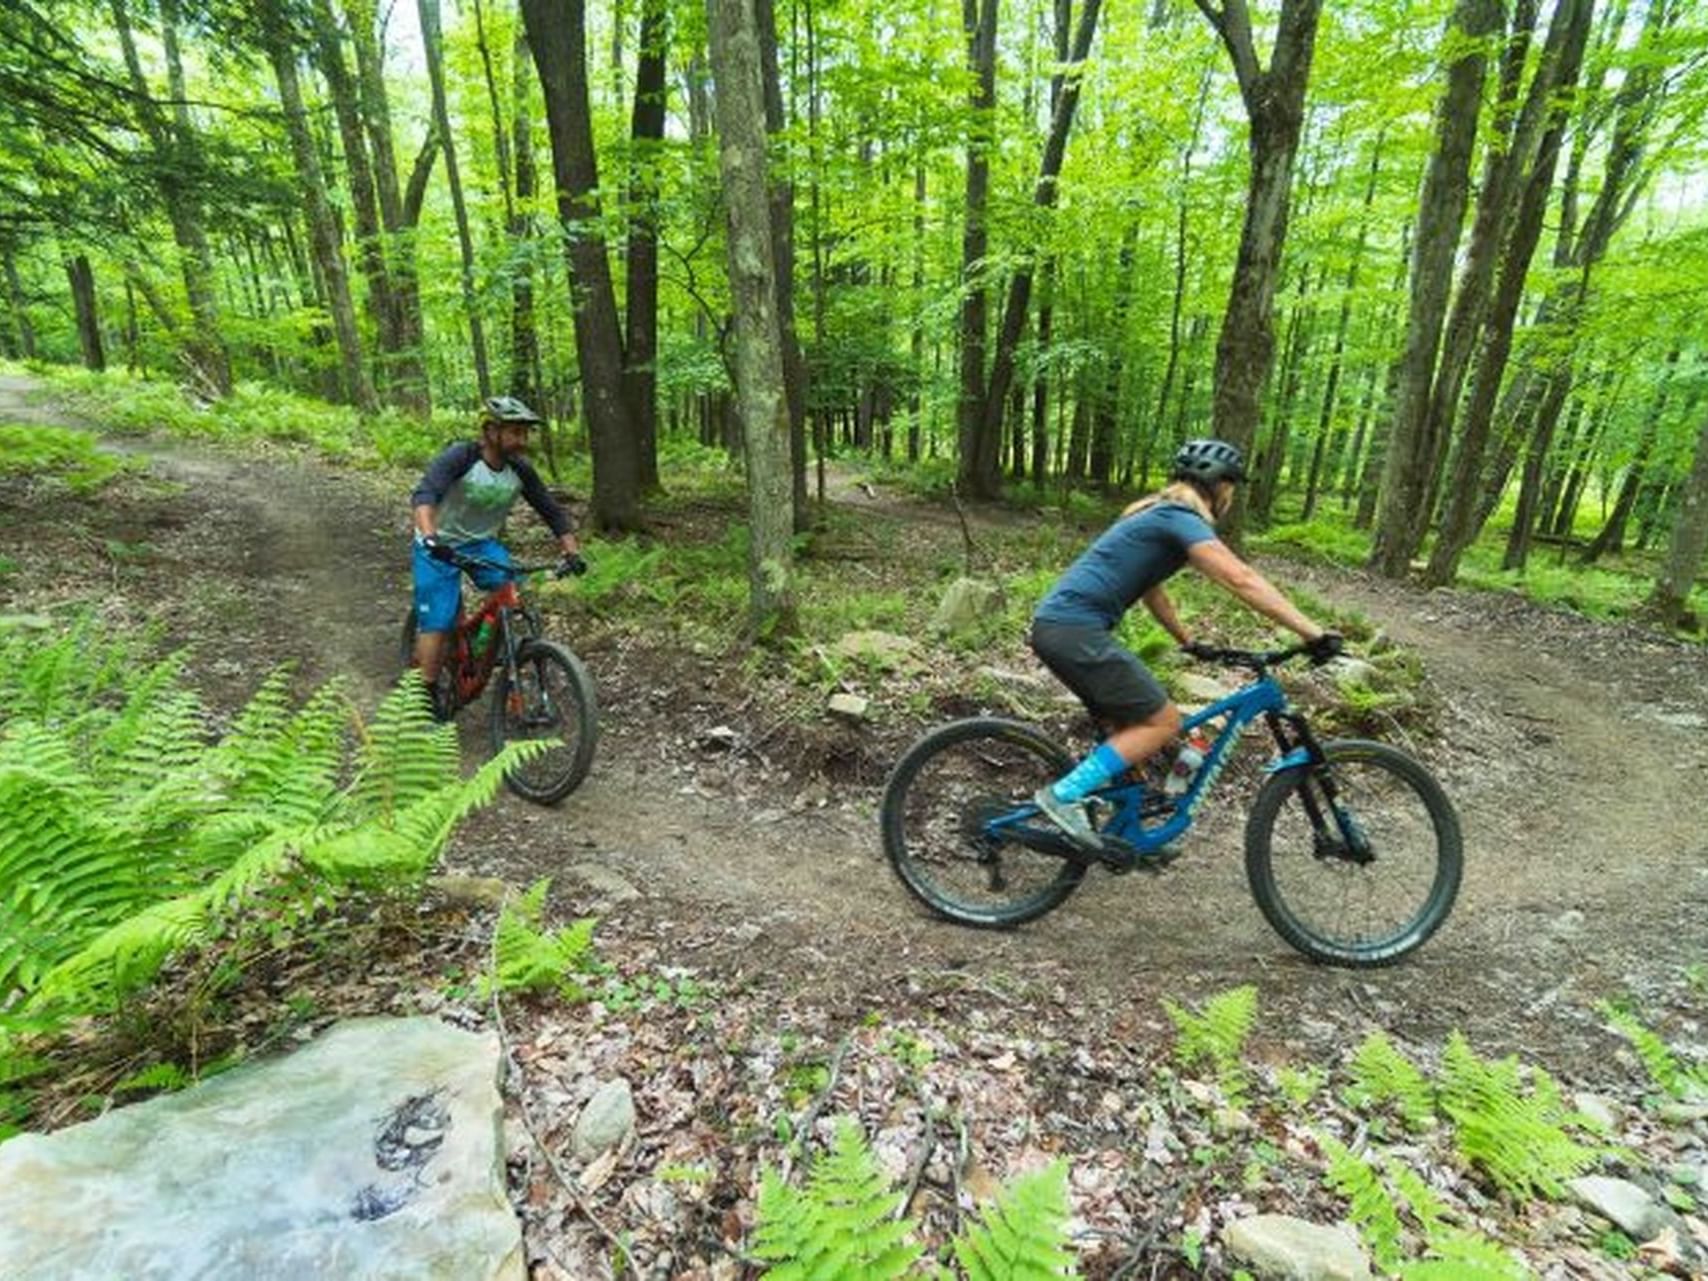 Mountain bikers exploring the woods near The Inn at Canaan